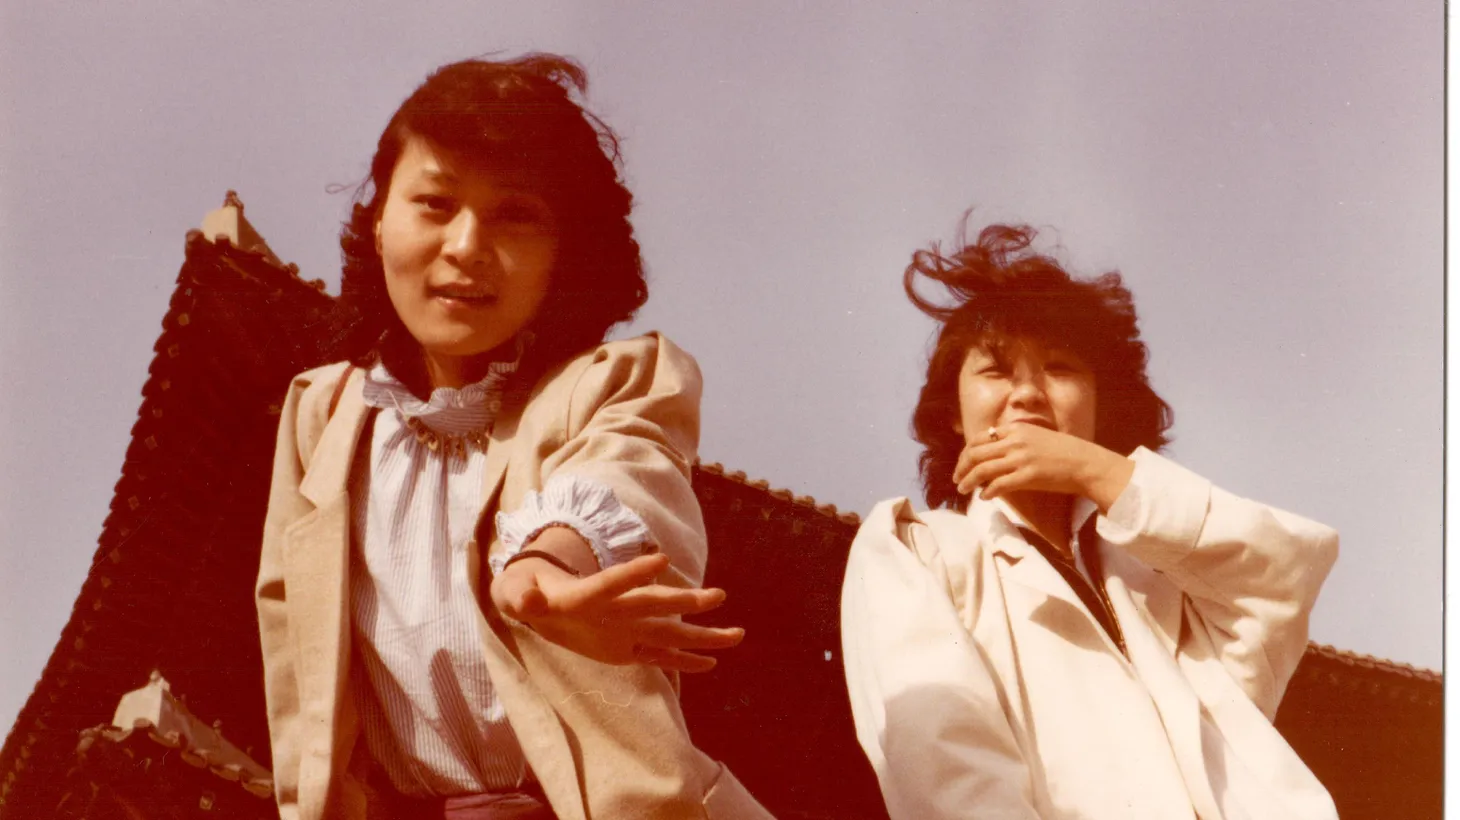 Michelle Zauner, who records under the name Japanese Breakfast, featured her mother (left) on the cover art for her album, “Psychopomp.” Zauner’s new memoir is a heartfelt reflection of loss and the comfort of food, family, and heritage.